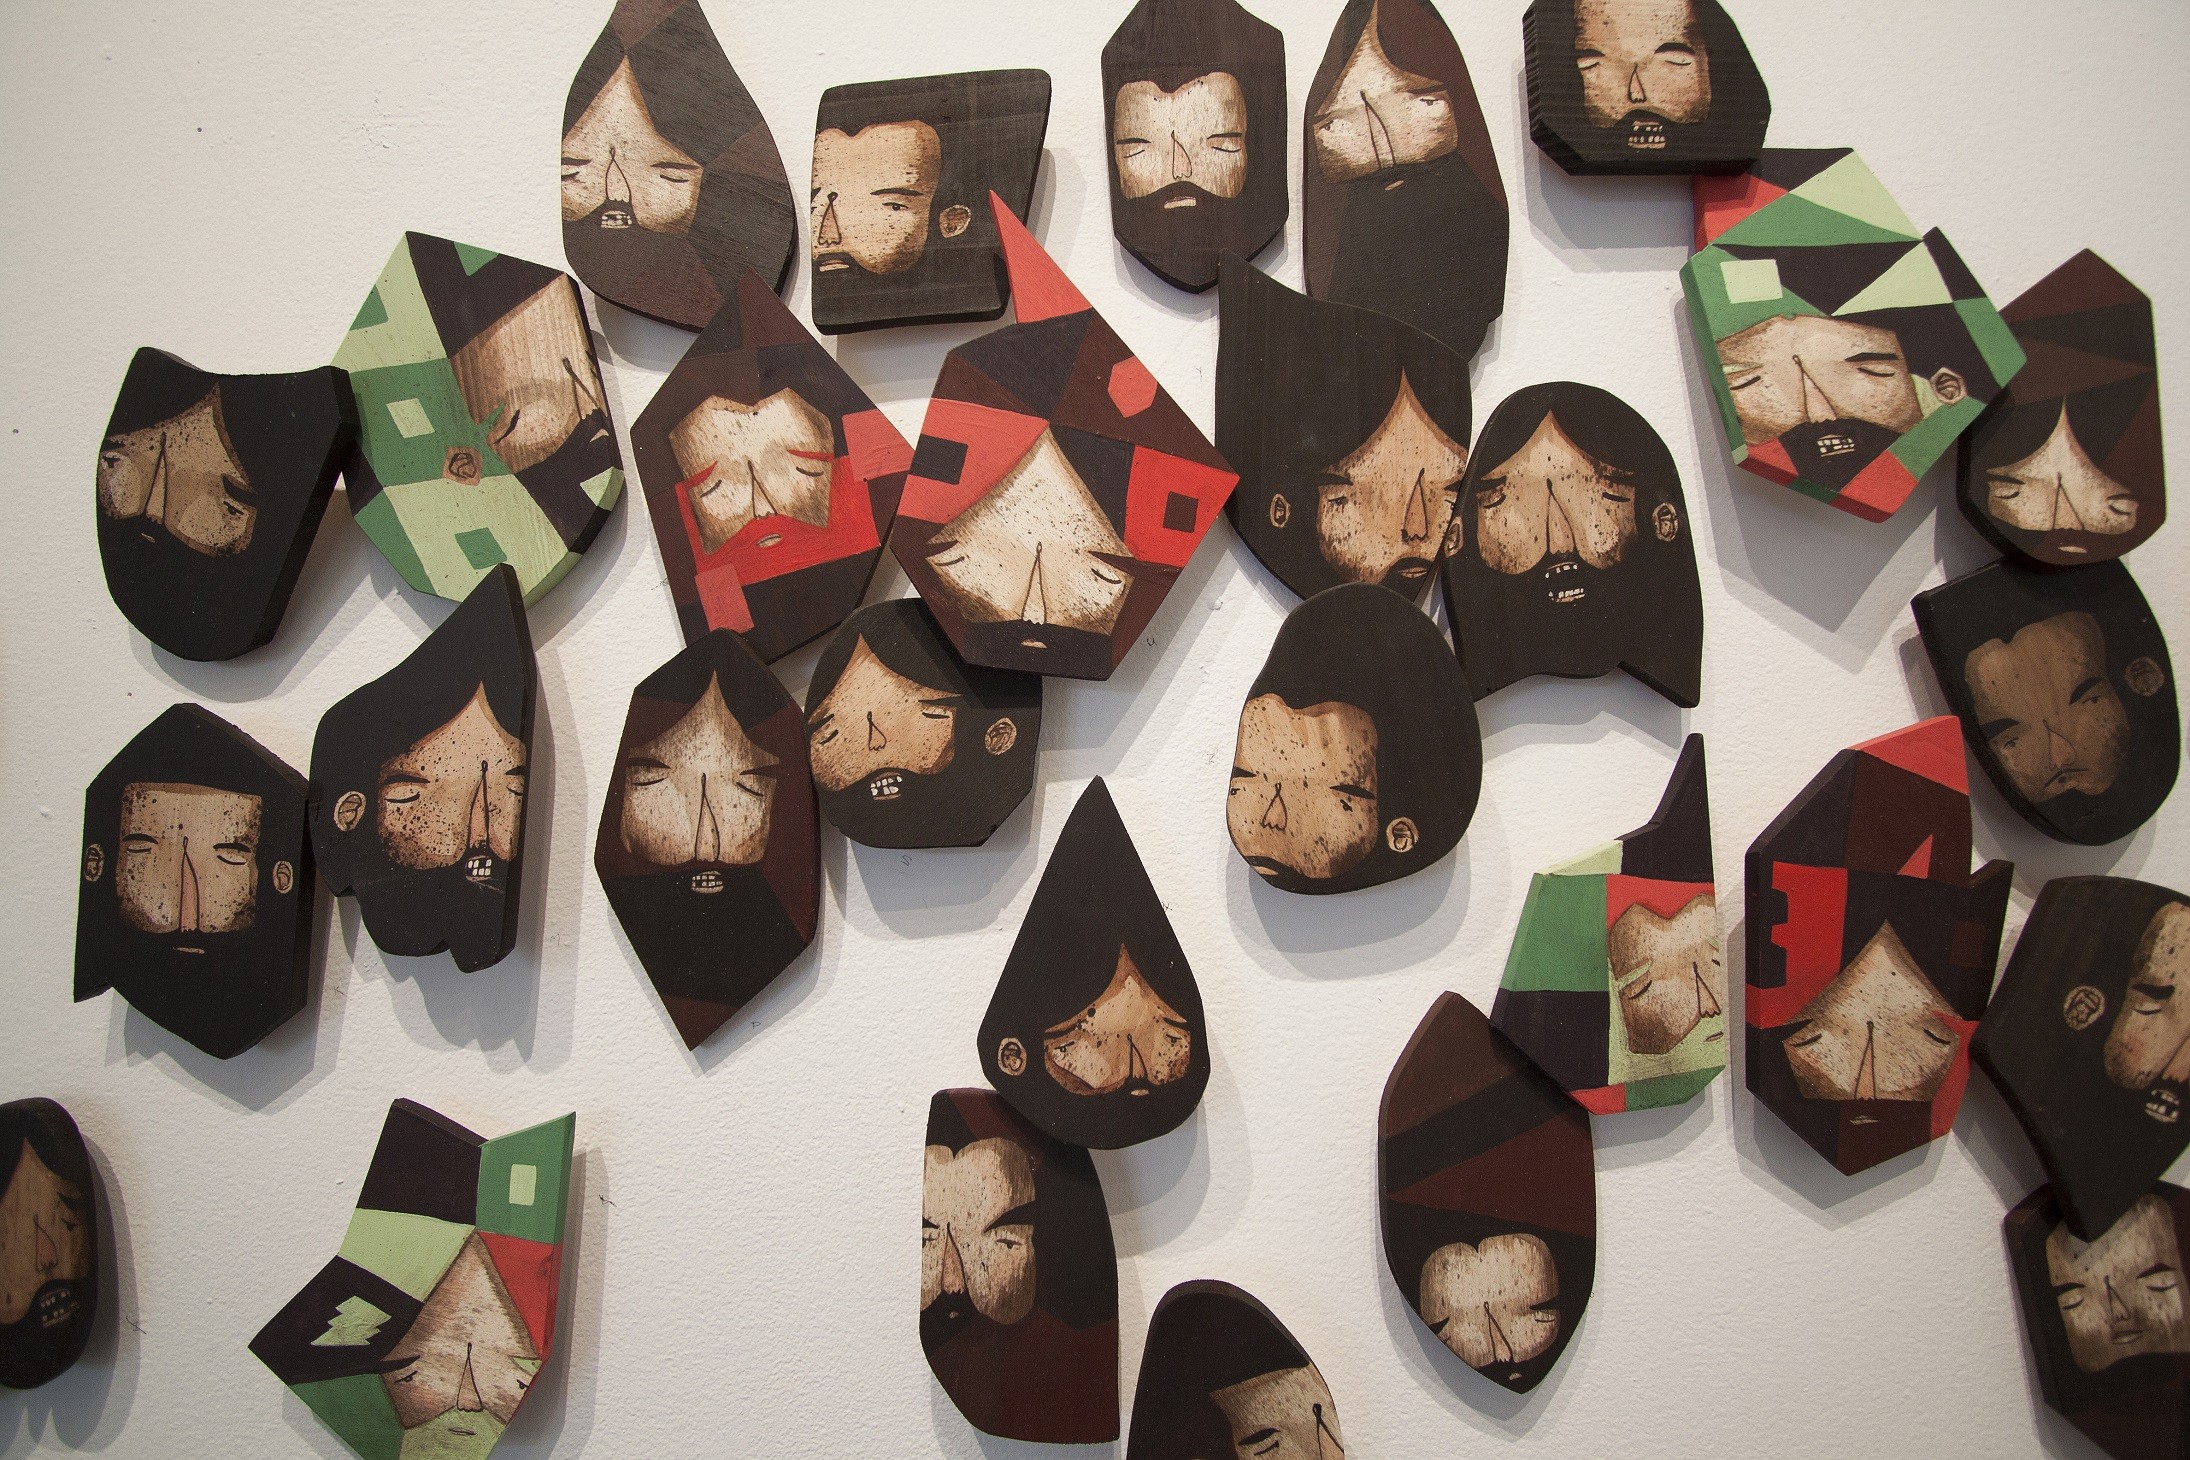 Jaime Molina's "Cutty Heads" is currently showing in 1975 Gallery's exhibition "Vulnerable Geometry." - PHOTO PROVIDED